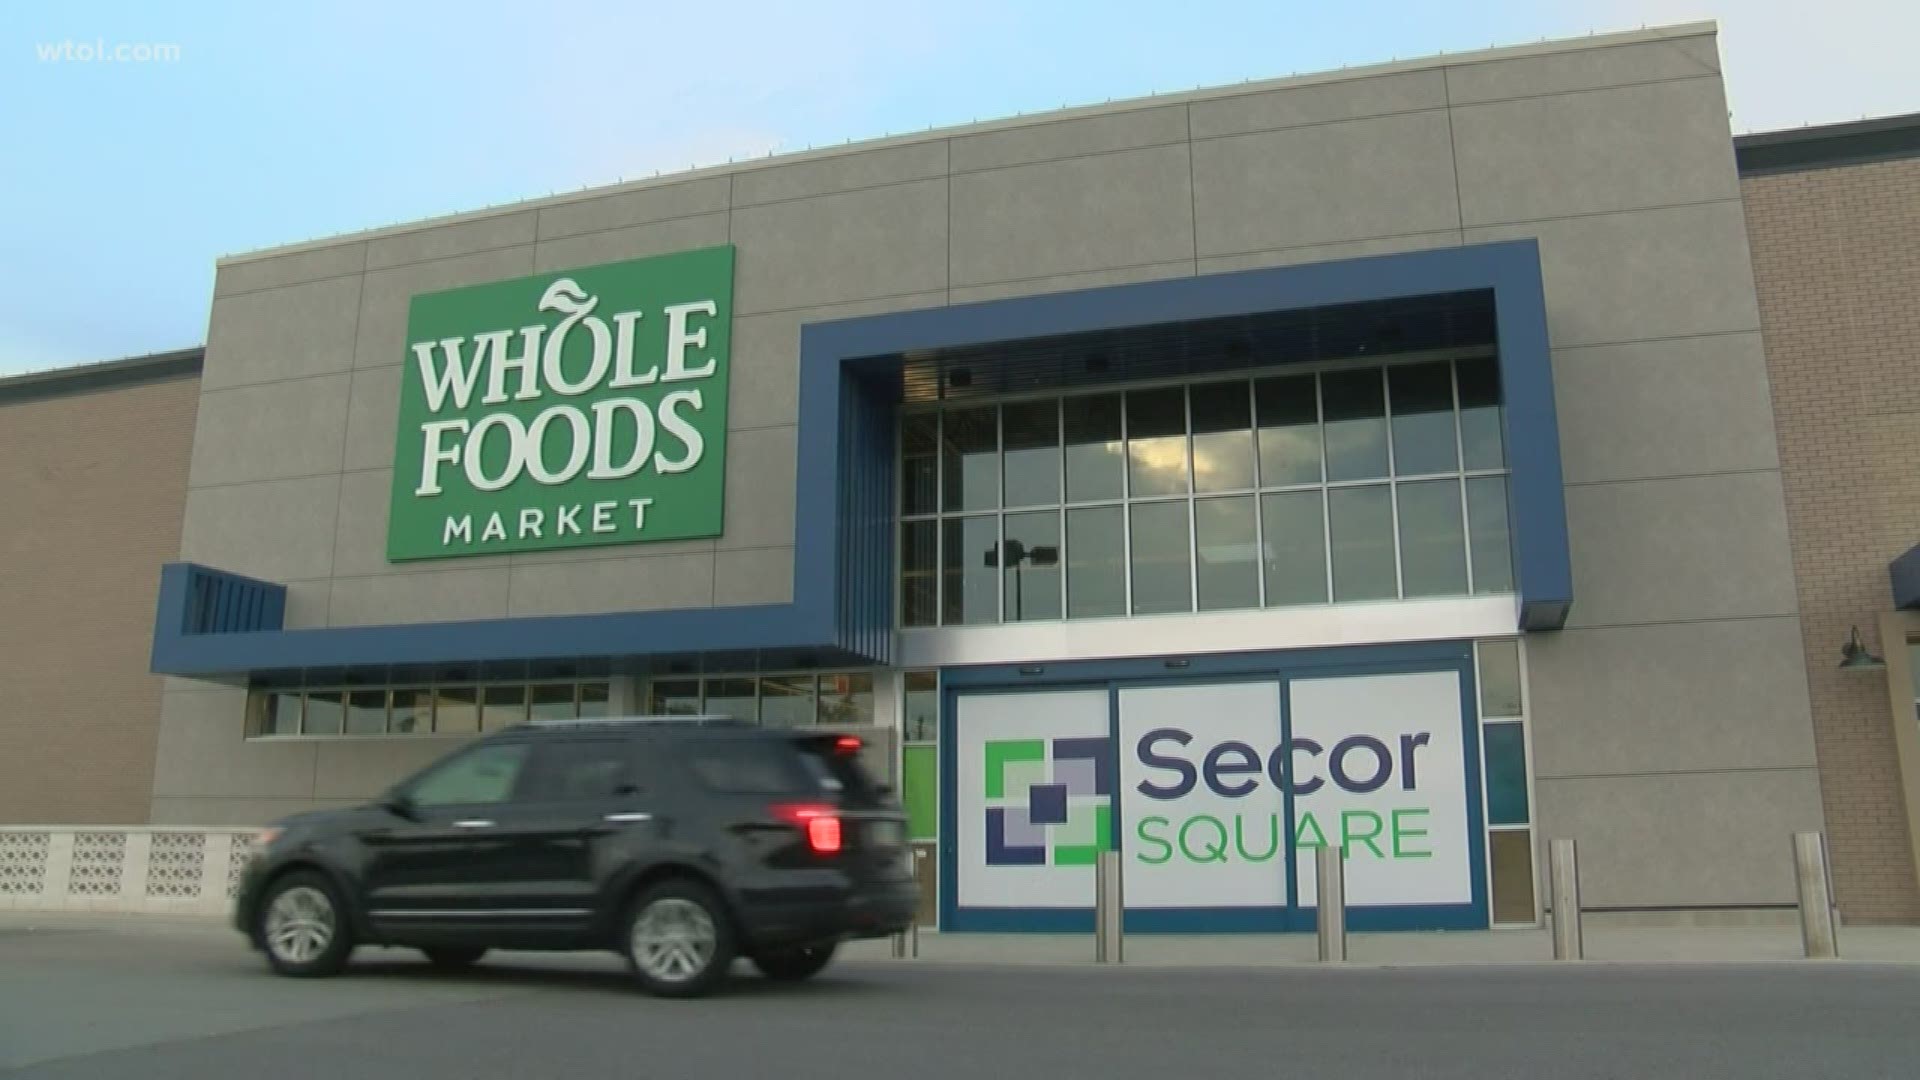 Whole Foods Market spokesperson pledges to be in touch with opening details